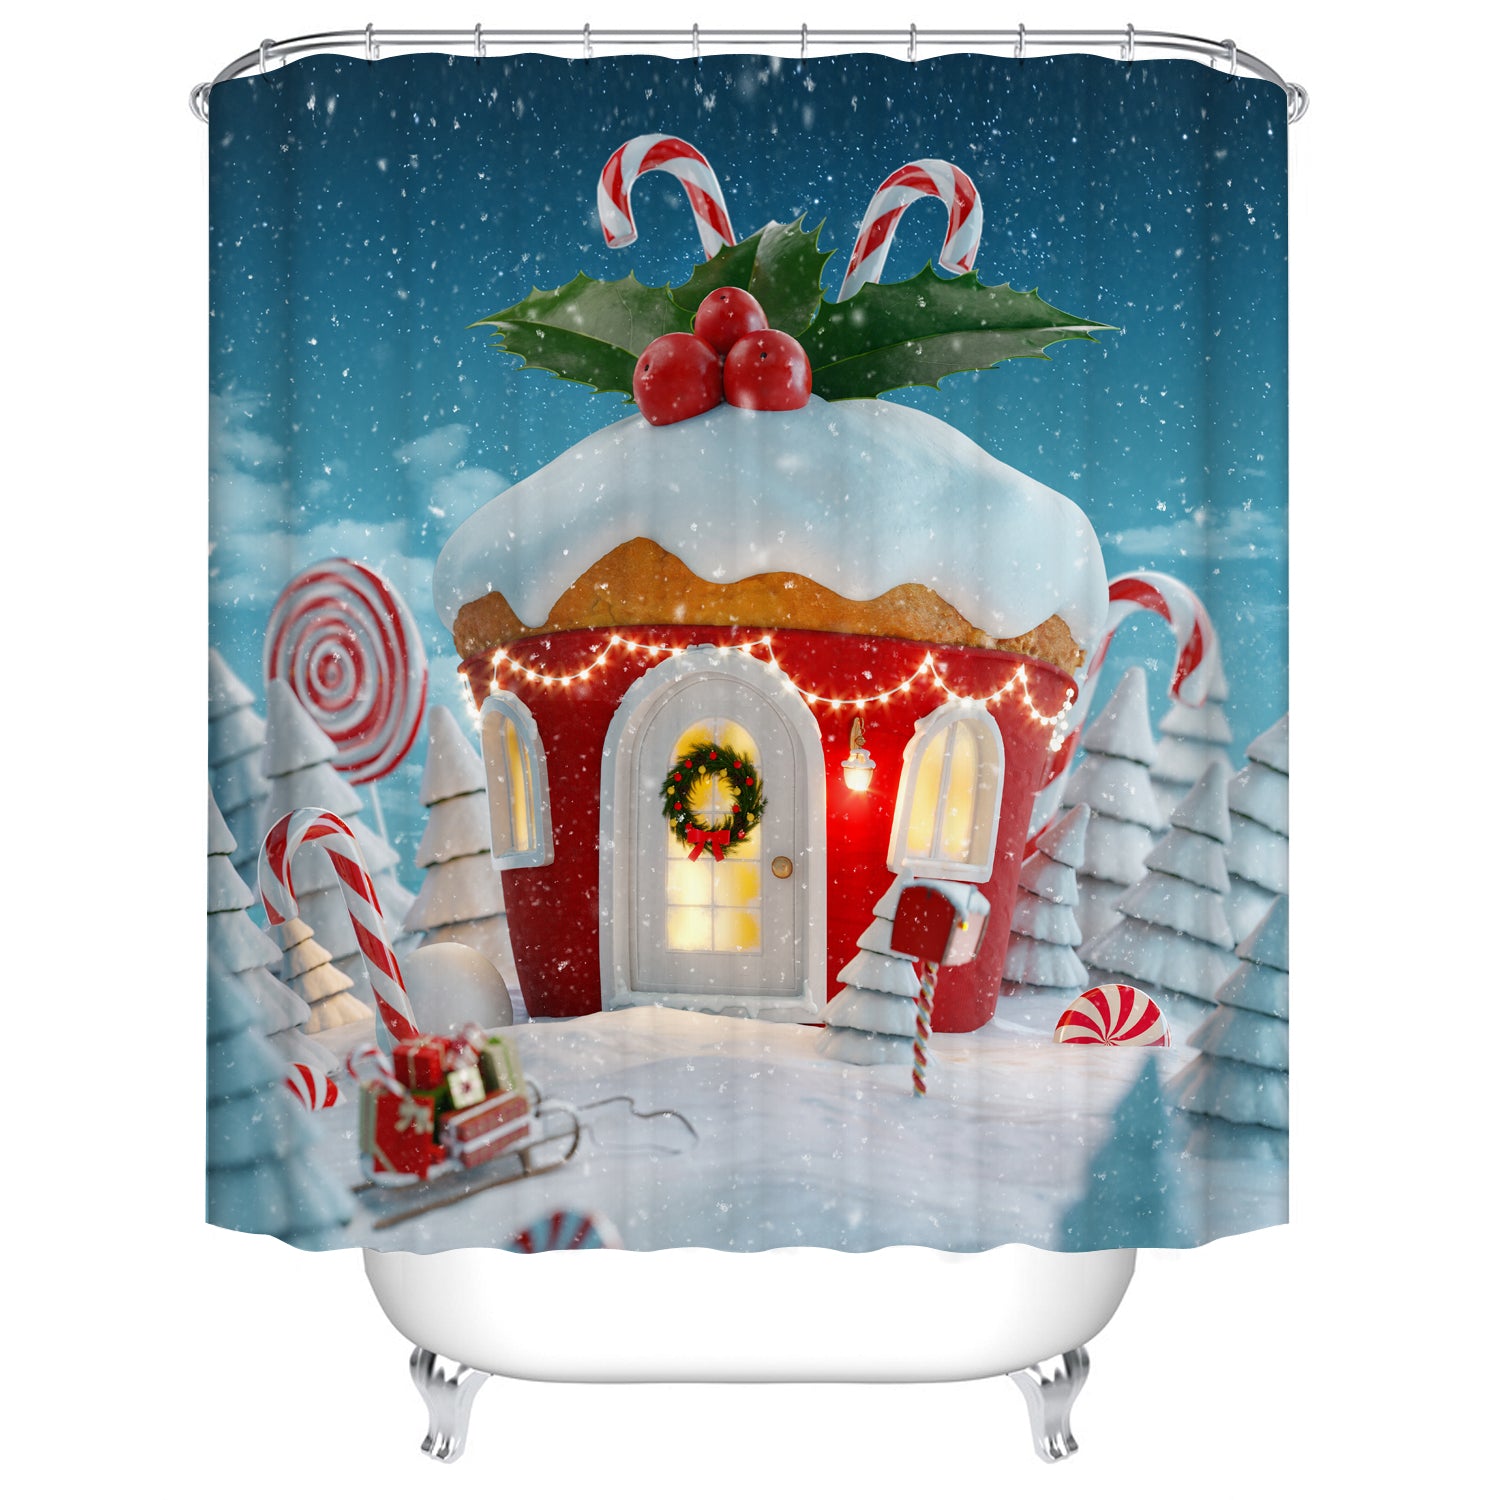 Red House Shaped Candy Canes on Top Christmas Decorated Muffin Shower Curtain